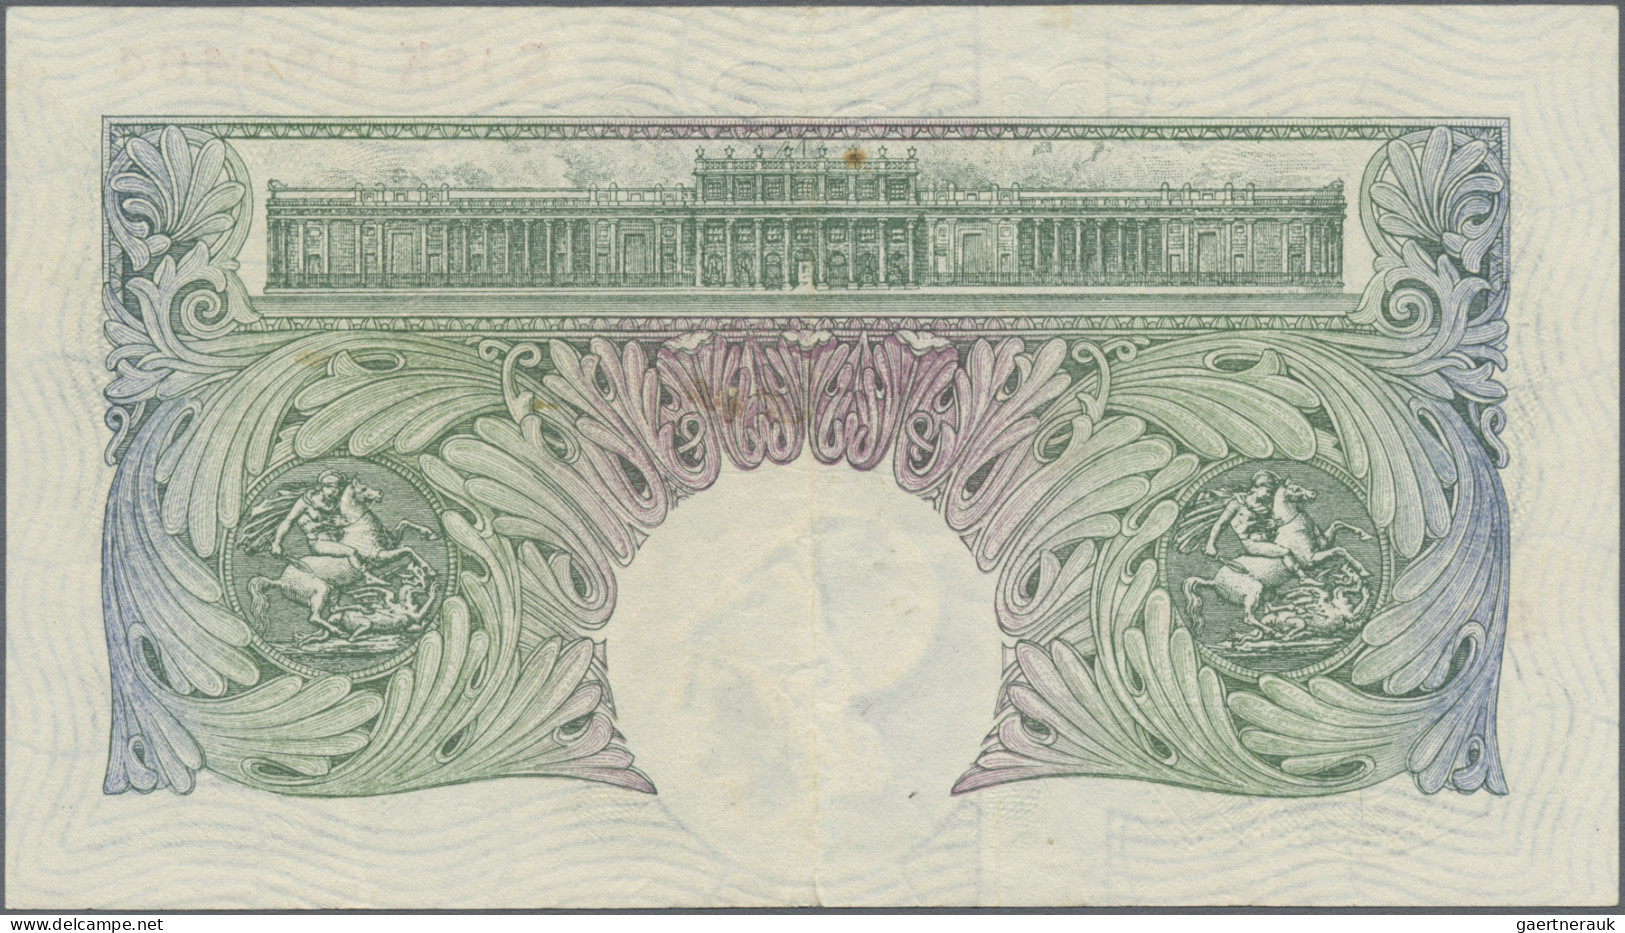 Great Britain: Bank of England, lot with 6 banknotes, series 1947-1955, comprisi